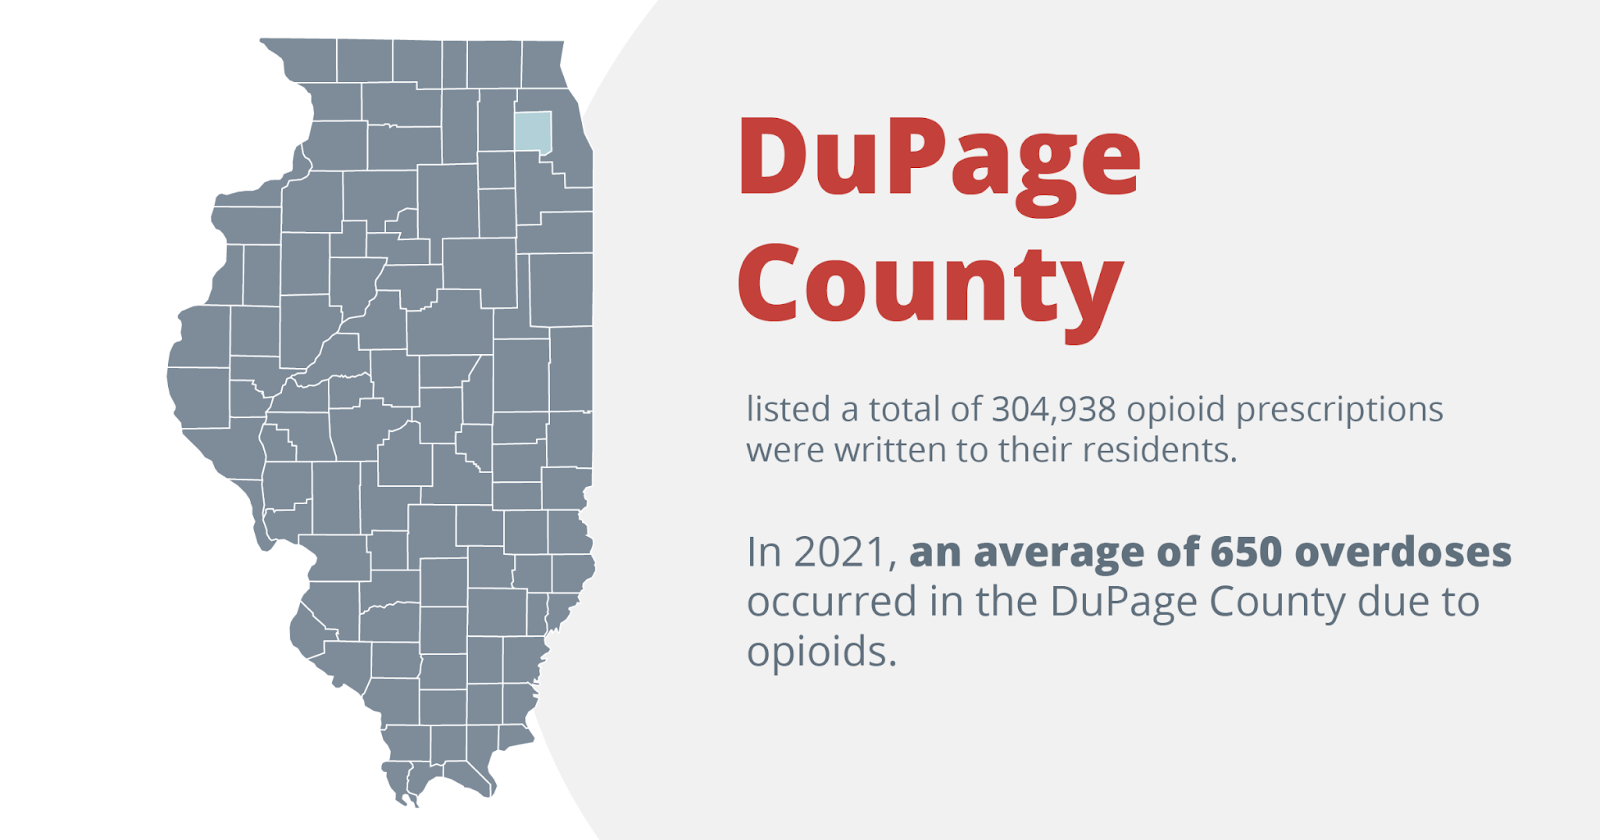 dupage county Drug and Alcohol Rehab and Detox in Naperville, IL